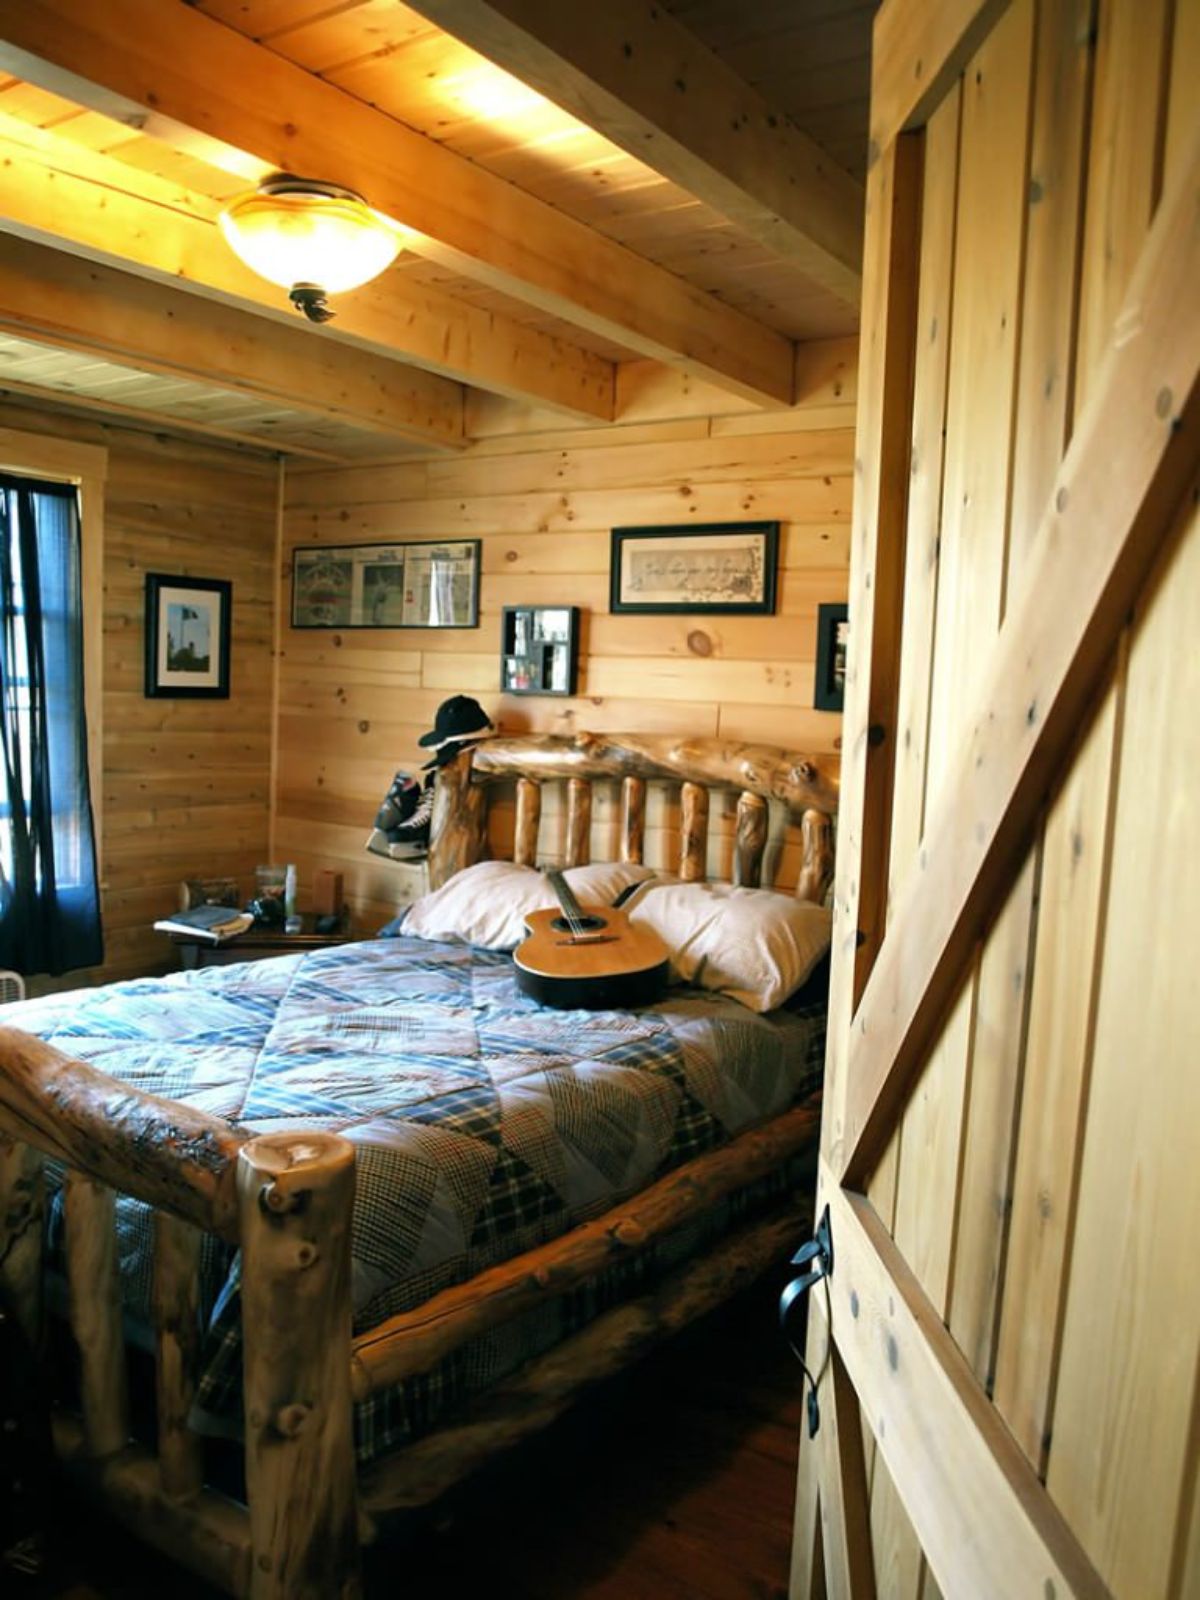 barn door open into bedroom with log bed frame and blue bedding on bed